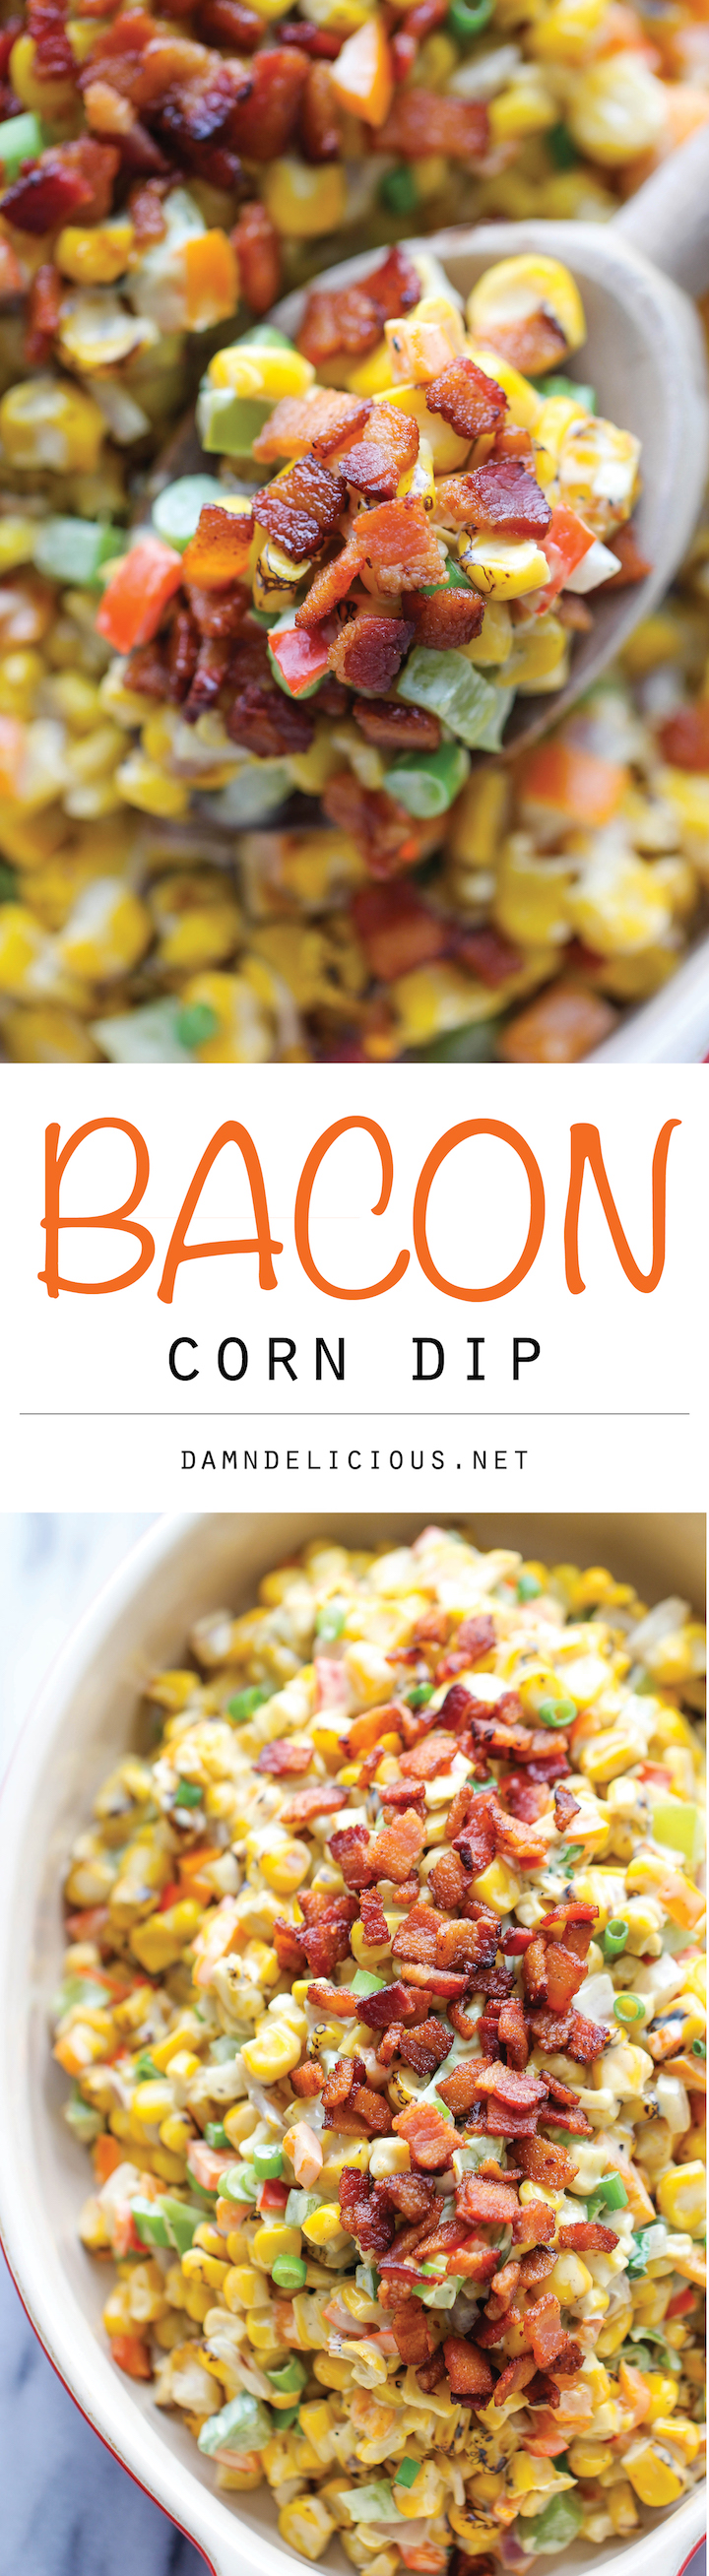 Bacon Corn Dip - This dip is unbelievably creamy and addicting. It's so good, you'll want to just skip the chips and eat this with a spoon!